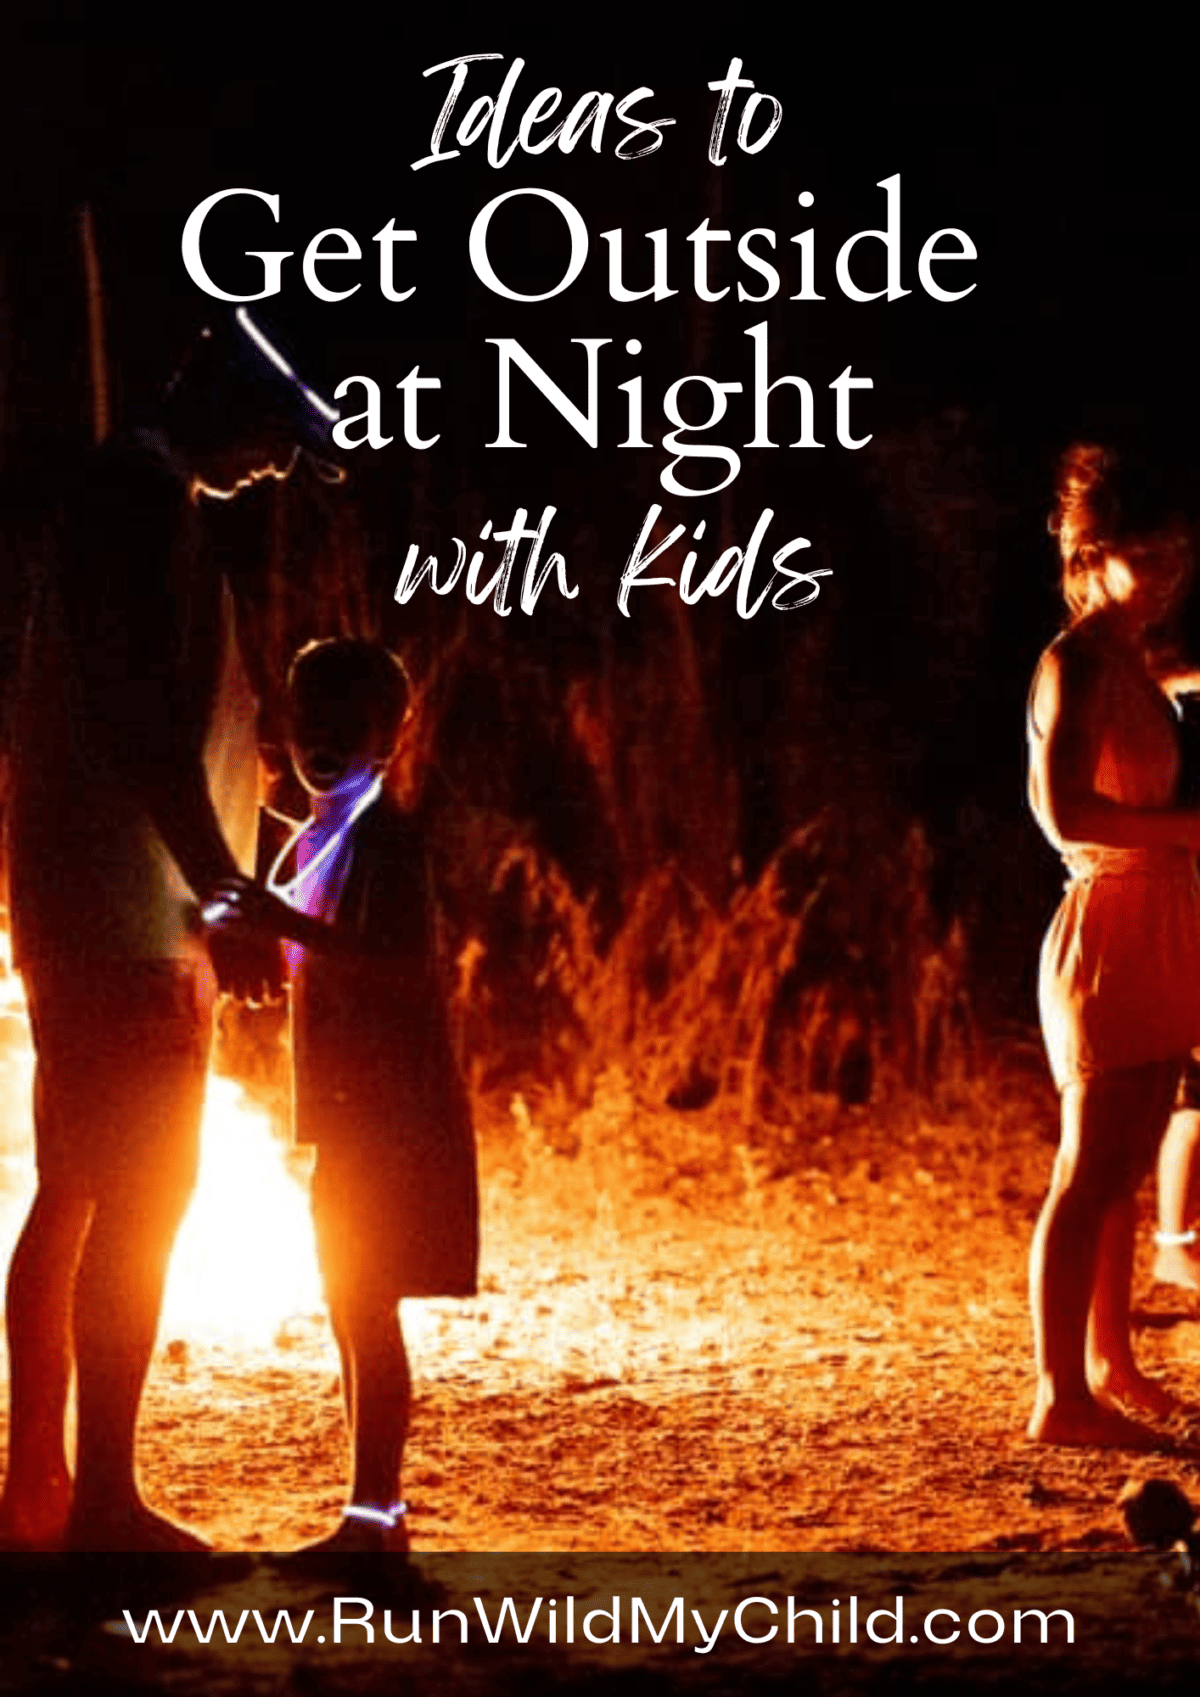 pinnable image for "ideas to get outside at night with kids"